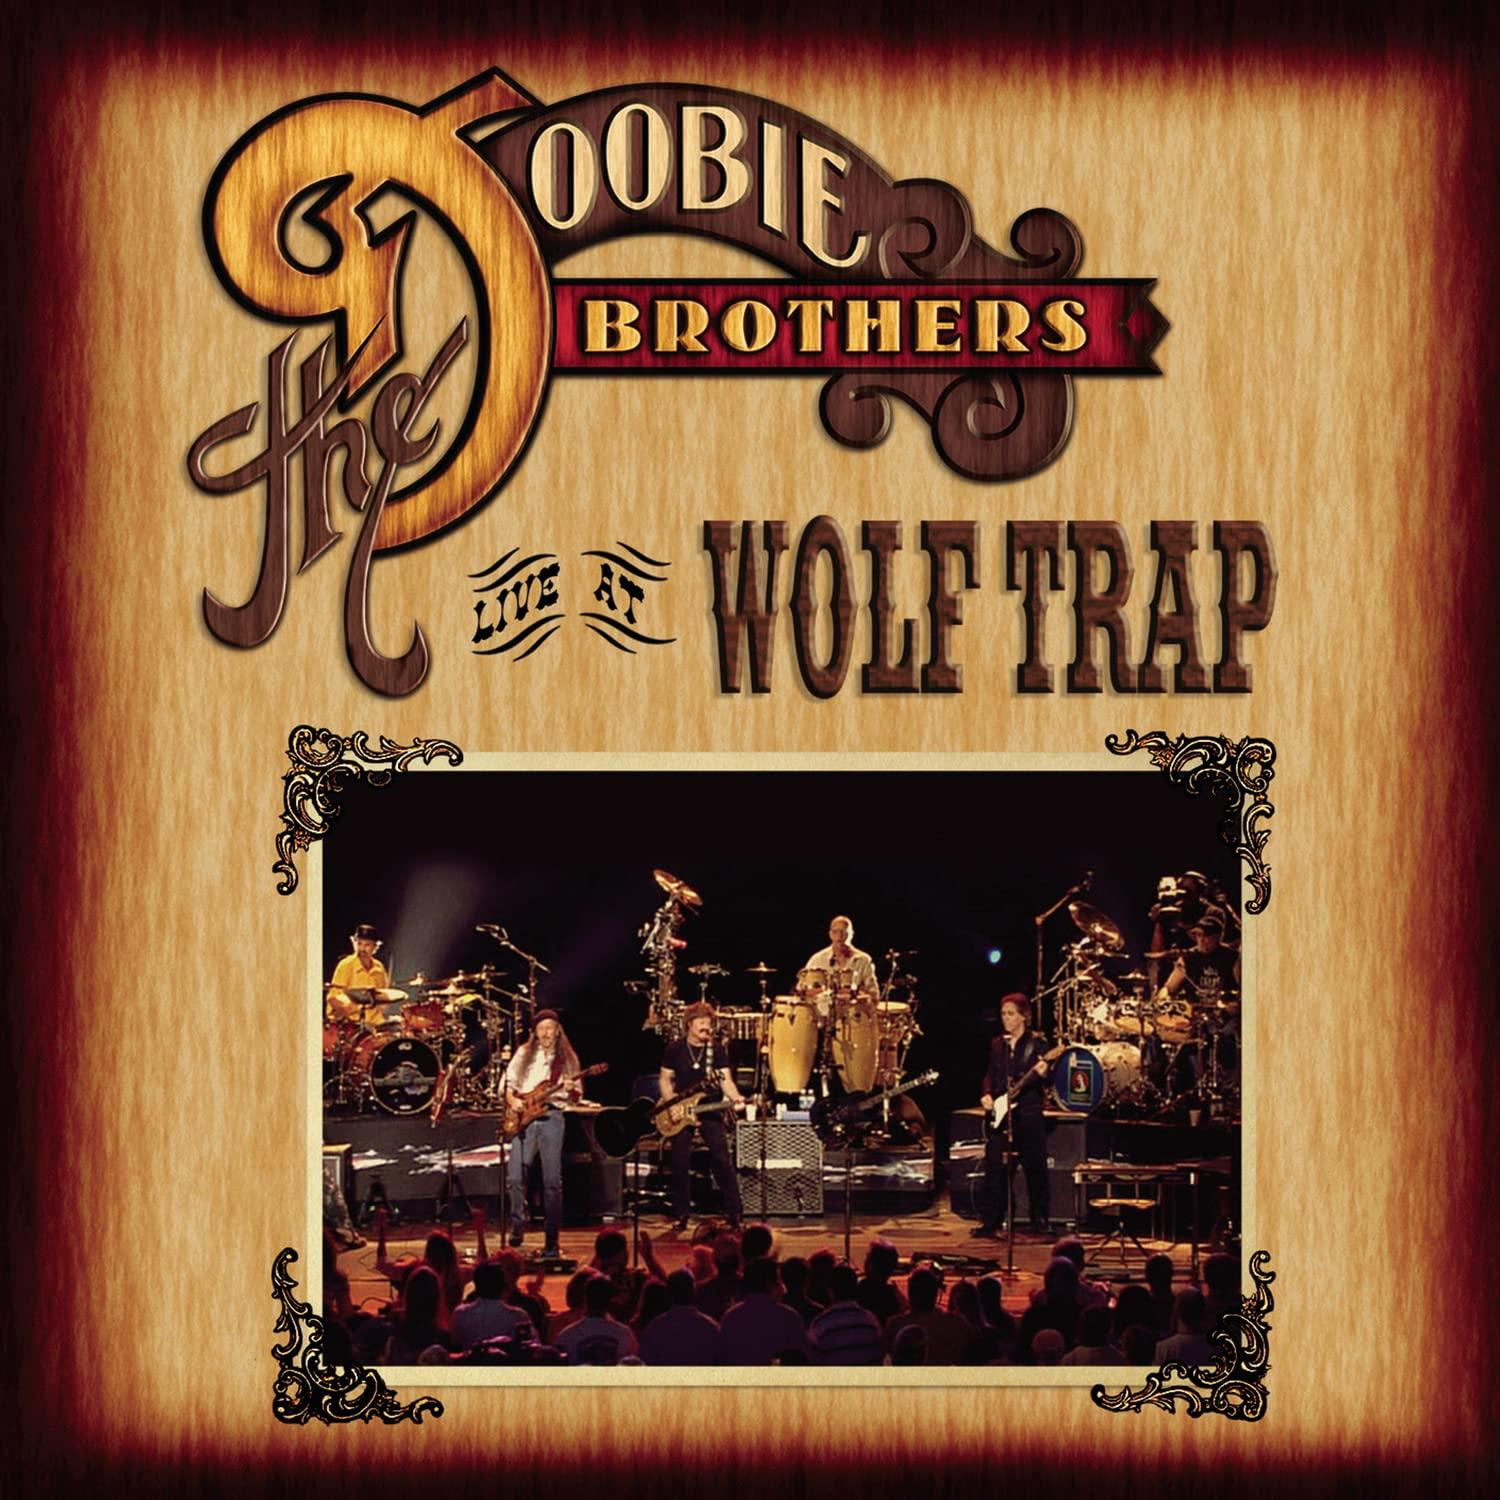 - Live (CD Doobie Video) Wolf At Trap + - DVD Brothers The